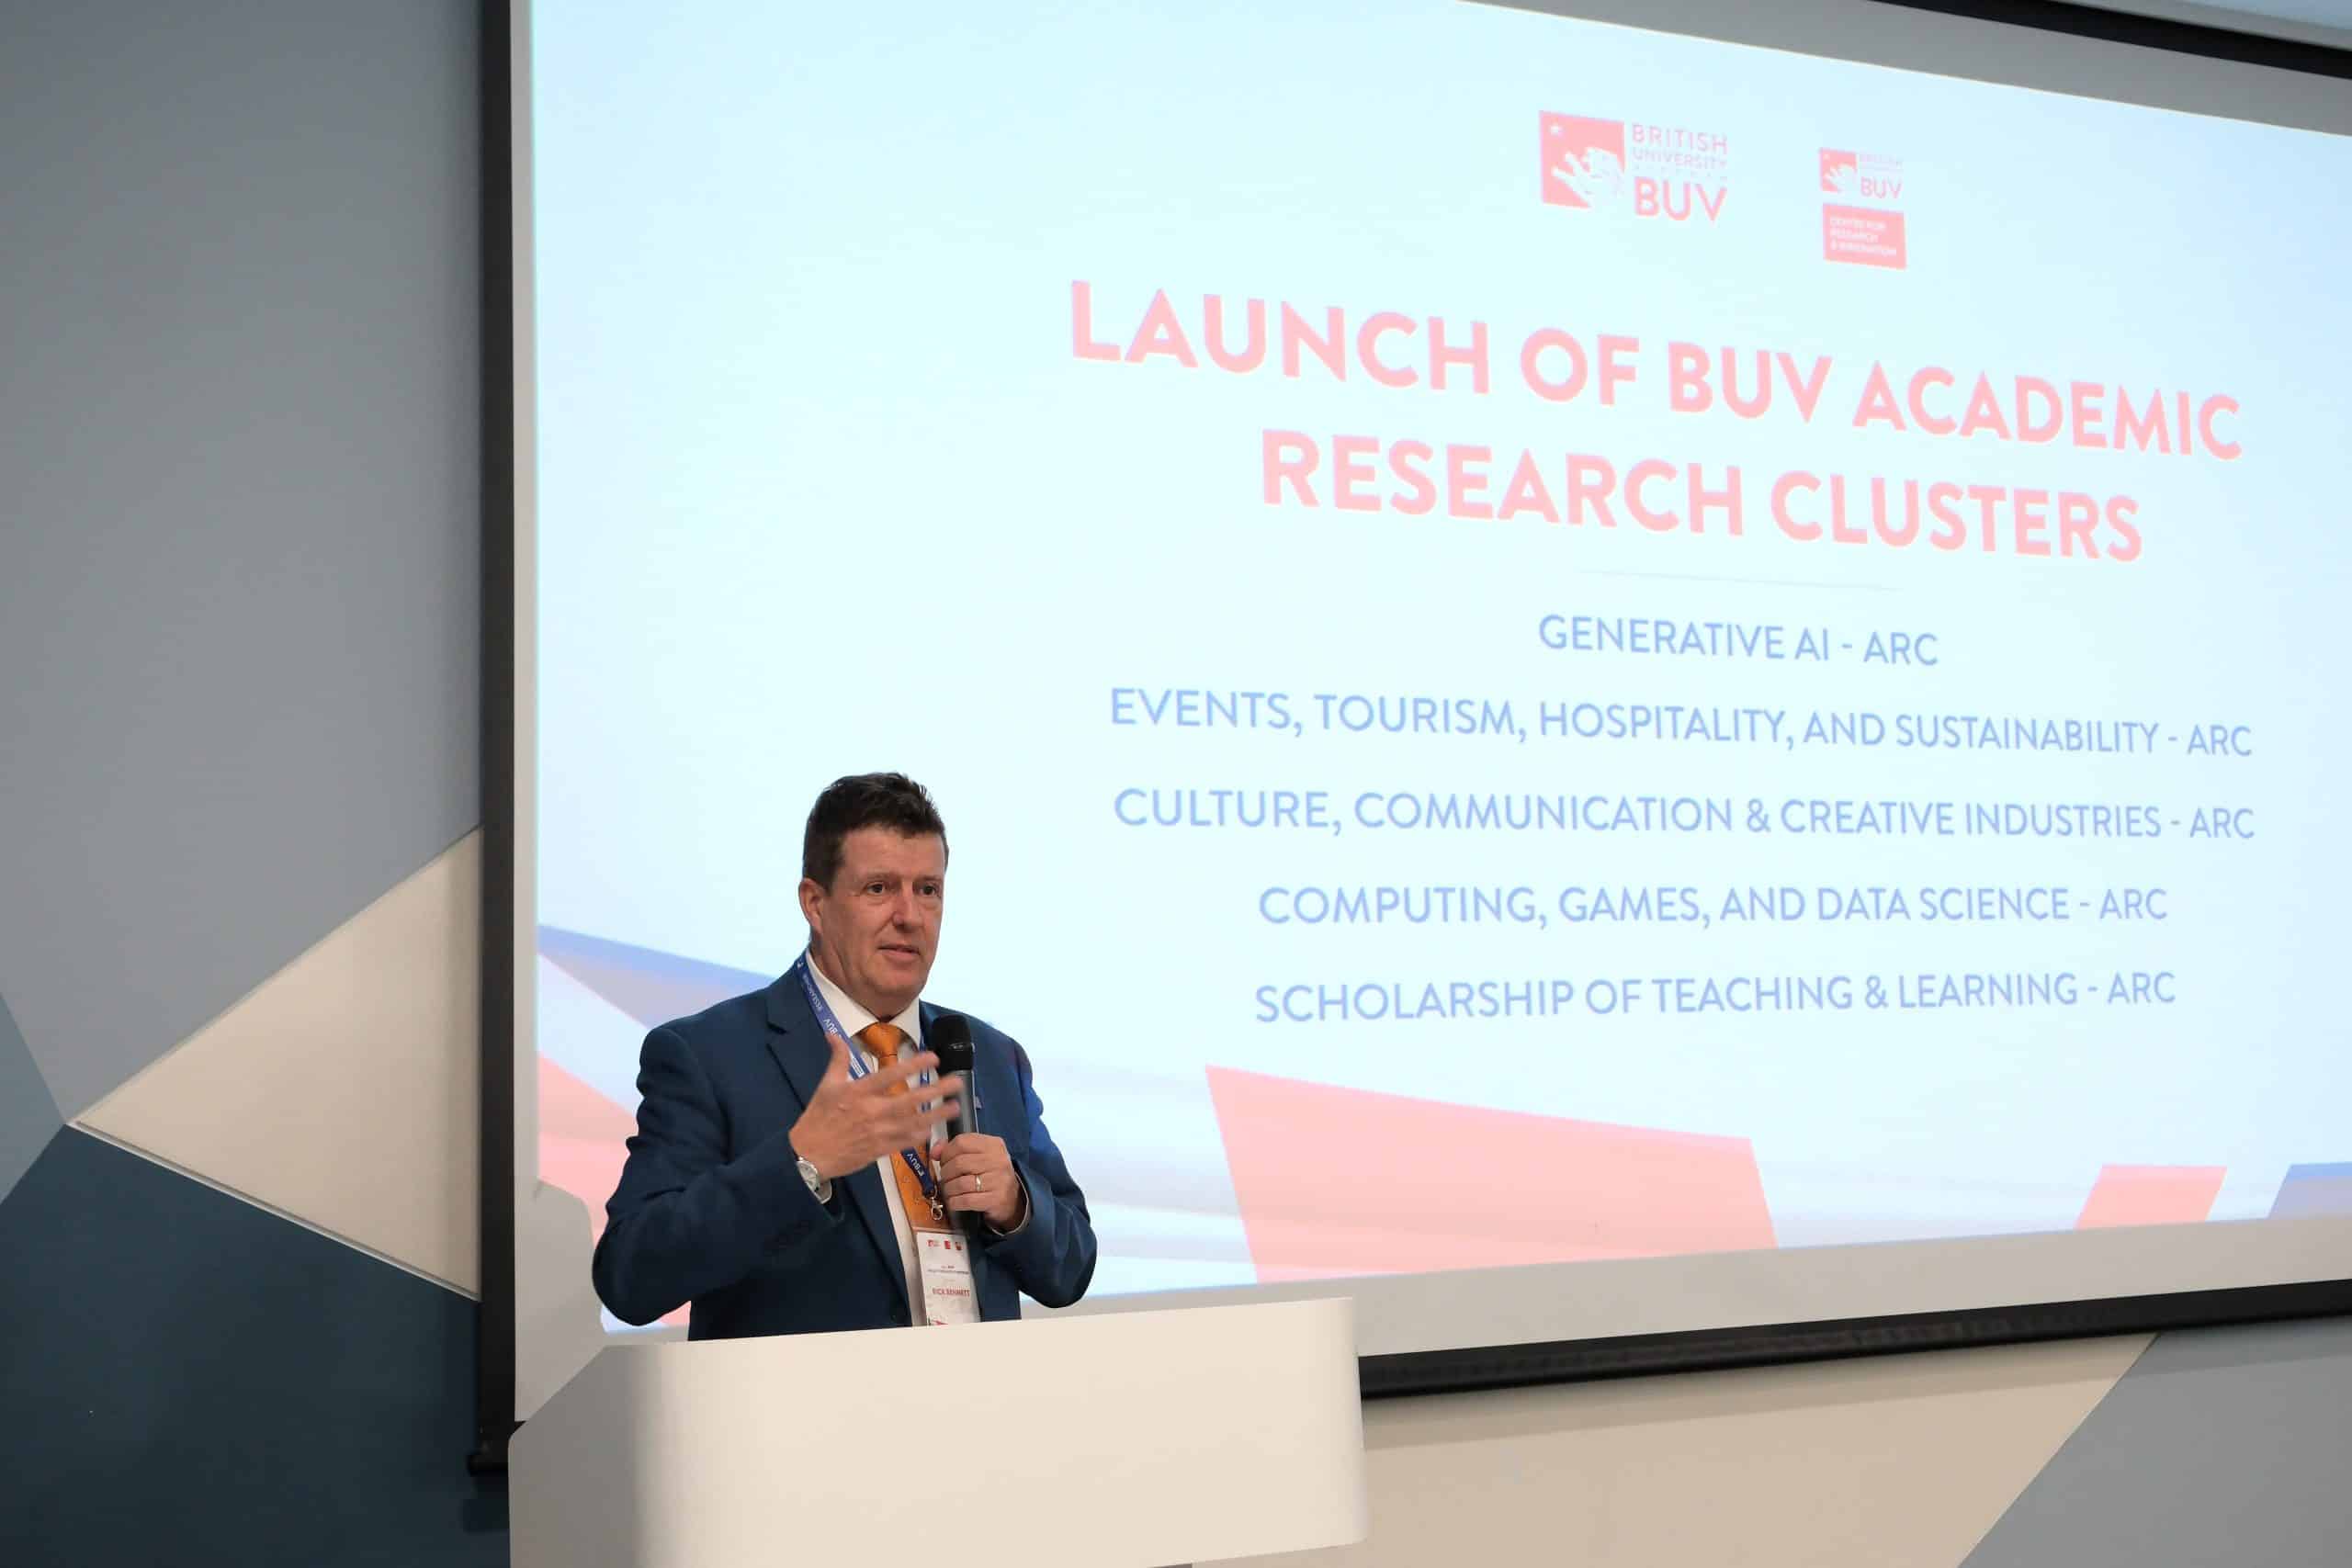 BUV launches Academic Research Clusters, further advancing interdisciplinary research through collaboration